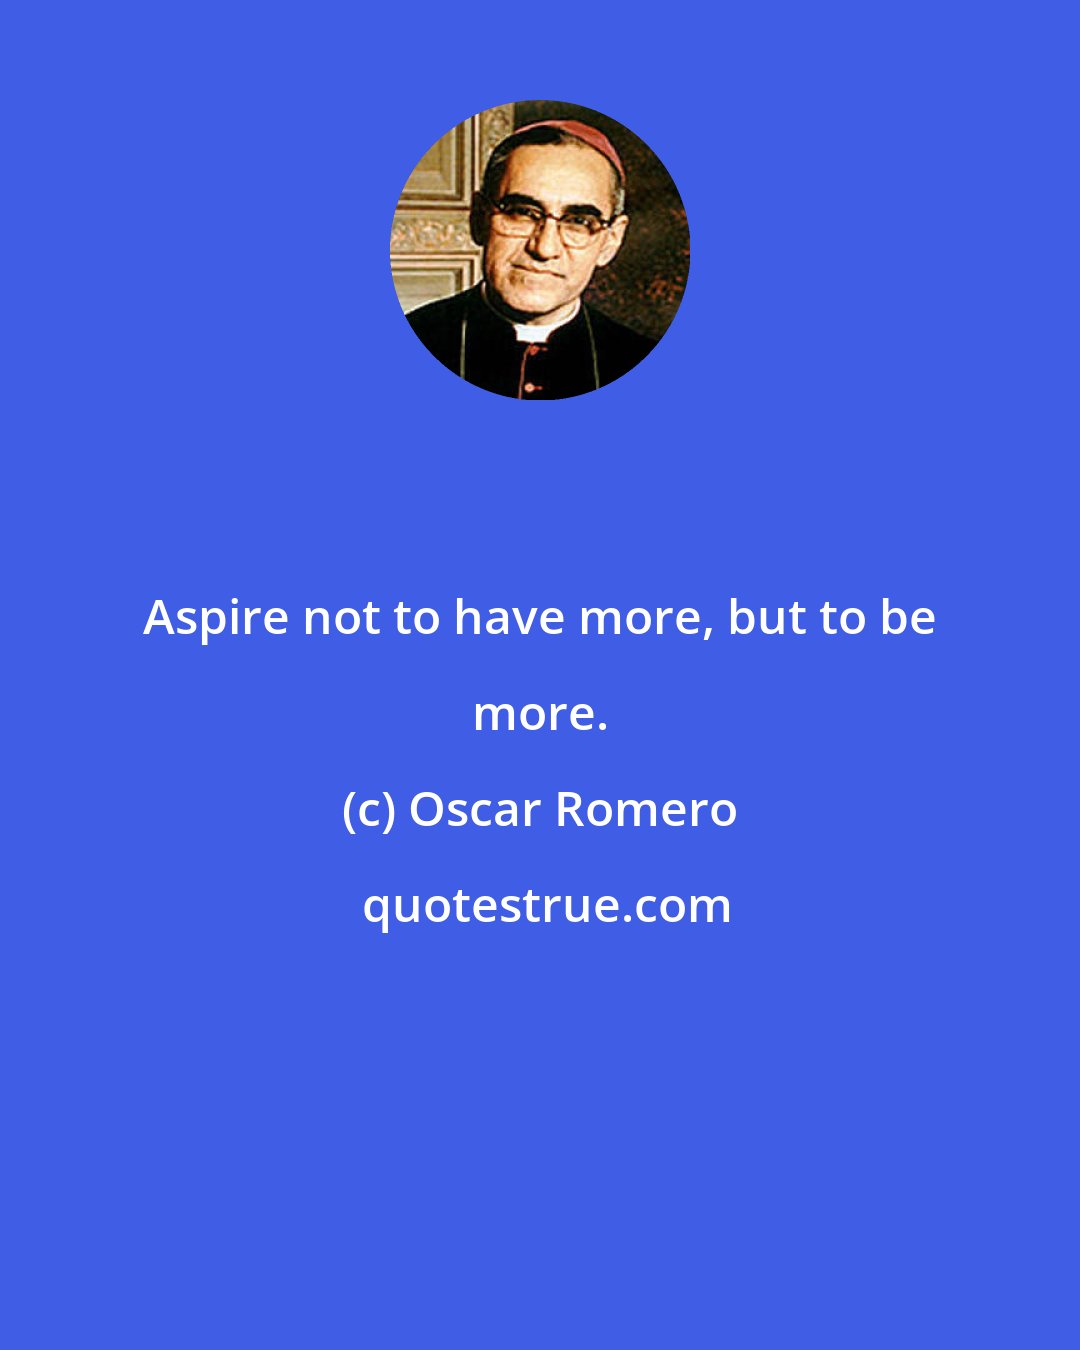 Oscar Romero: Aspire not to have more, but to be more.